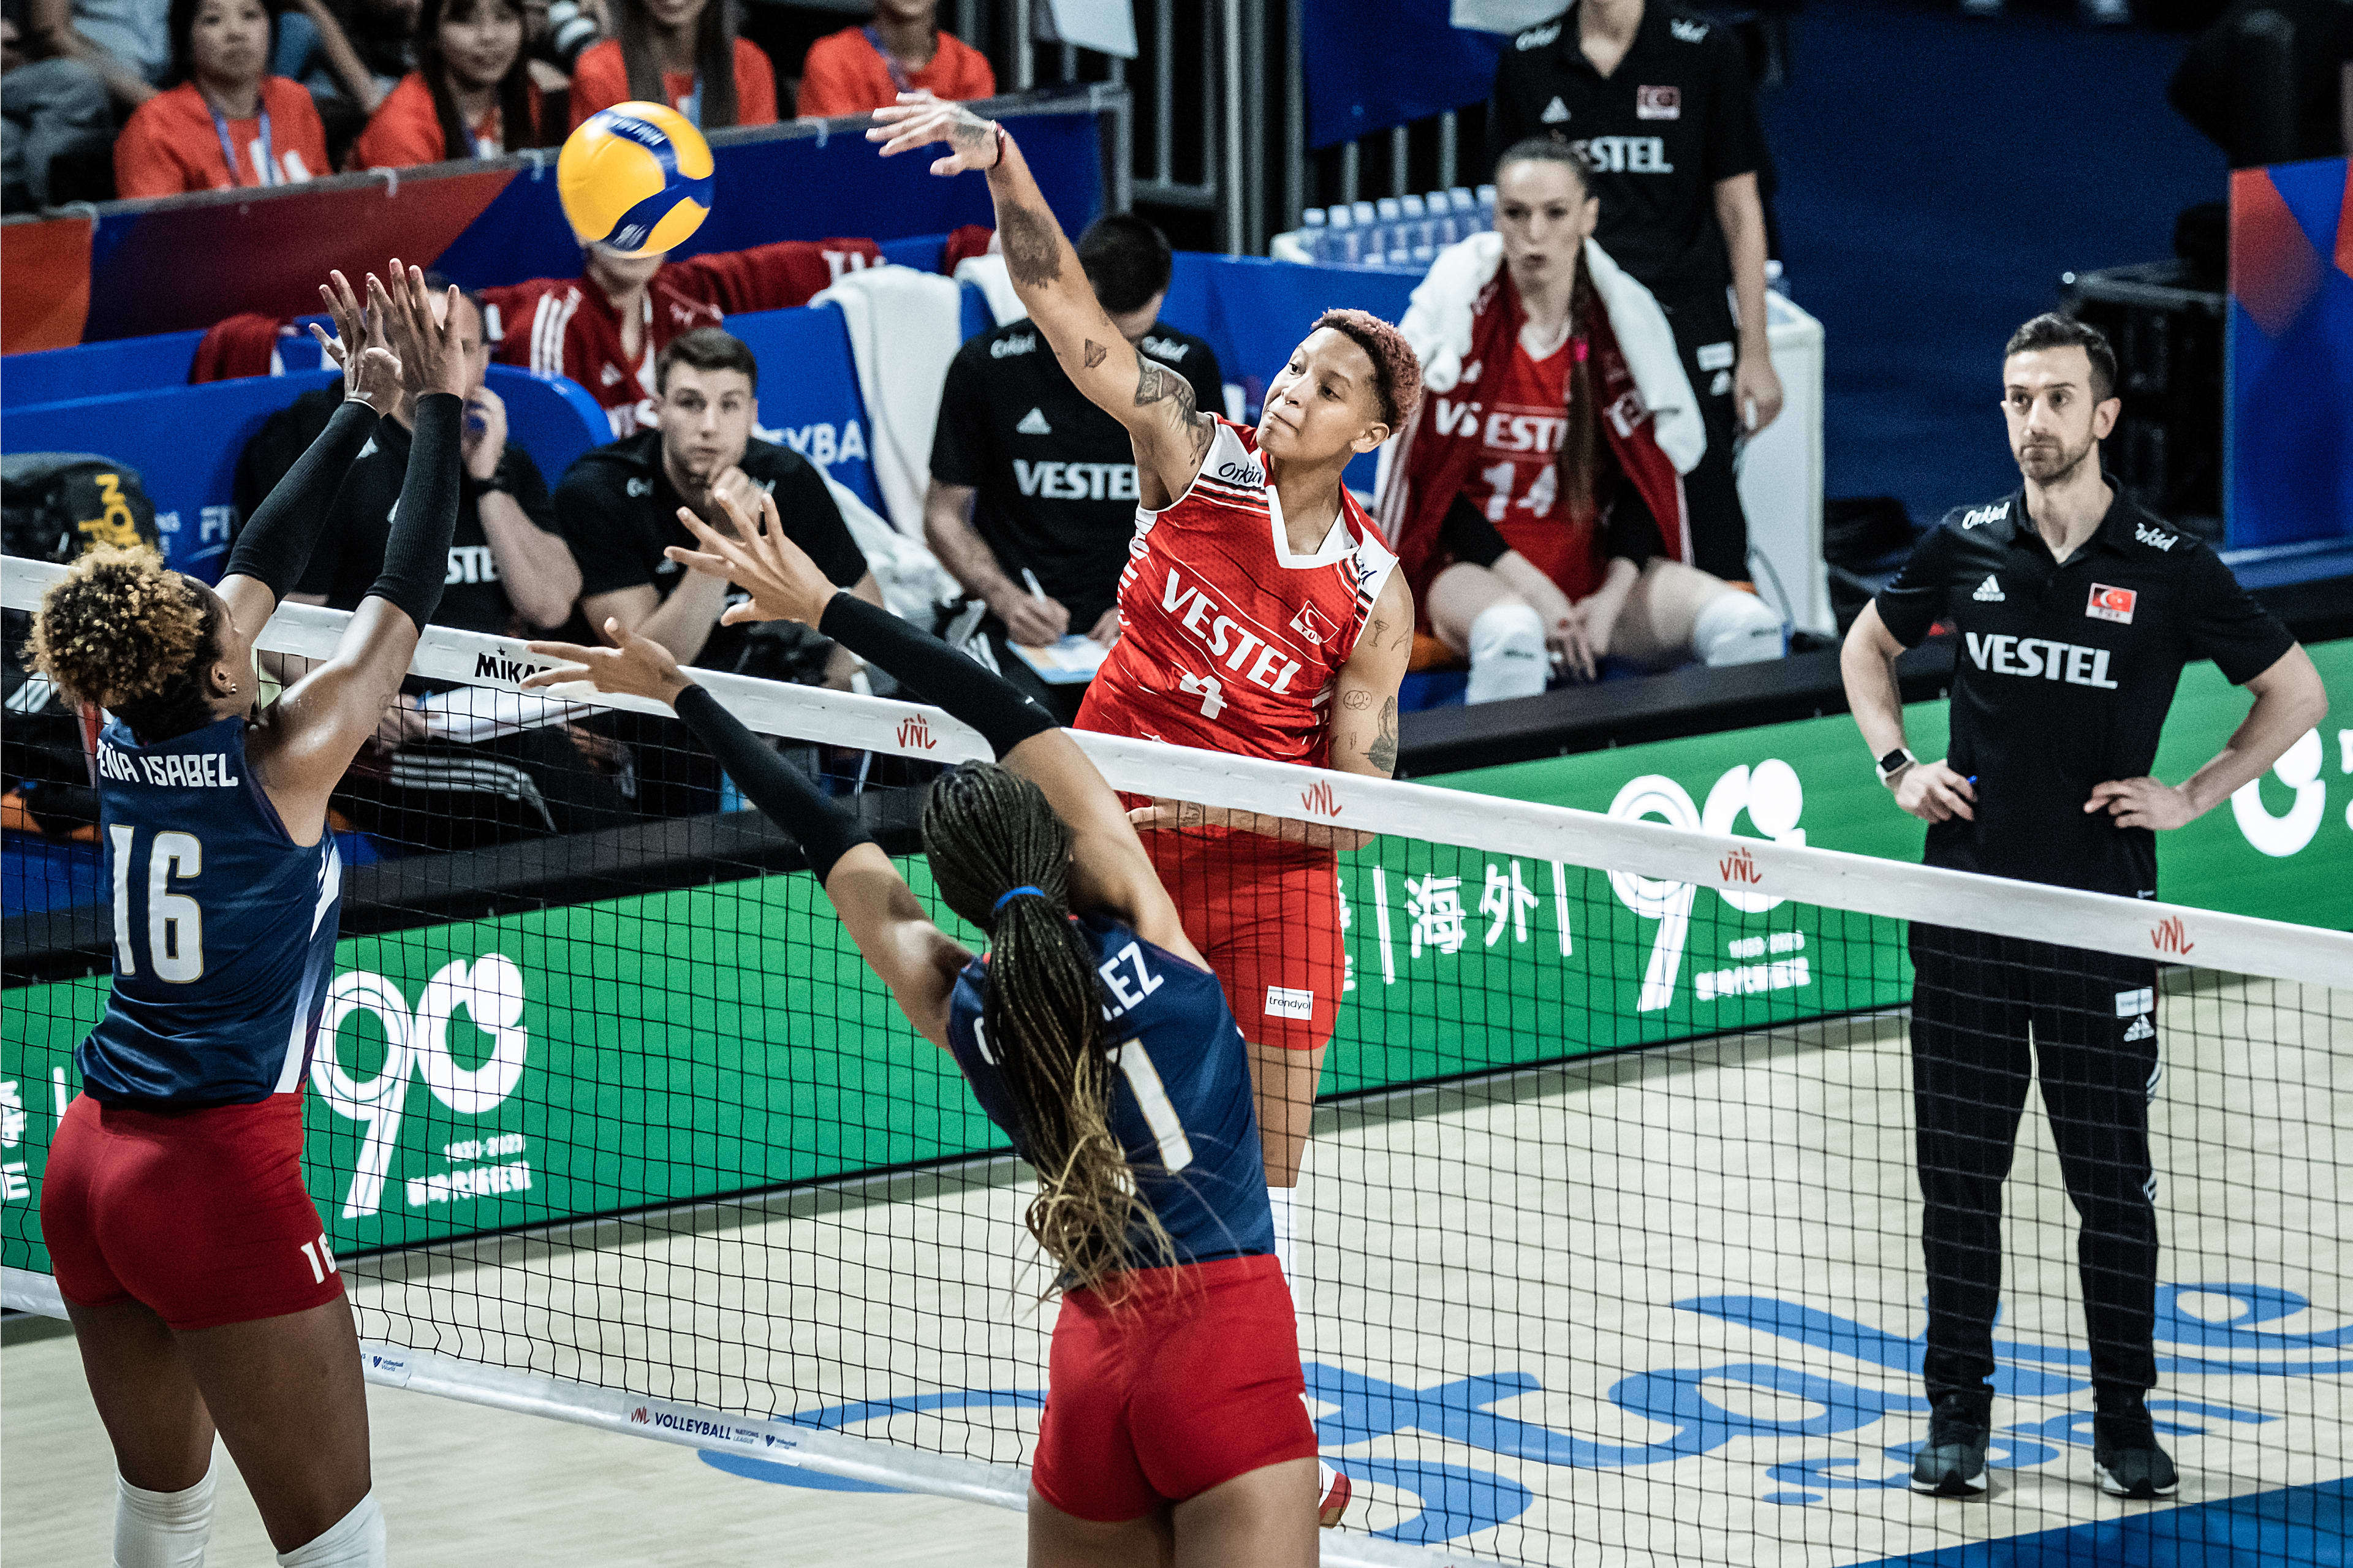 Melissa Vargas spikes the ball for Turkey against the Dominican Republic. Photo: Handout